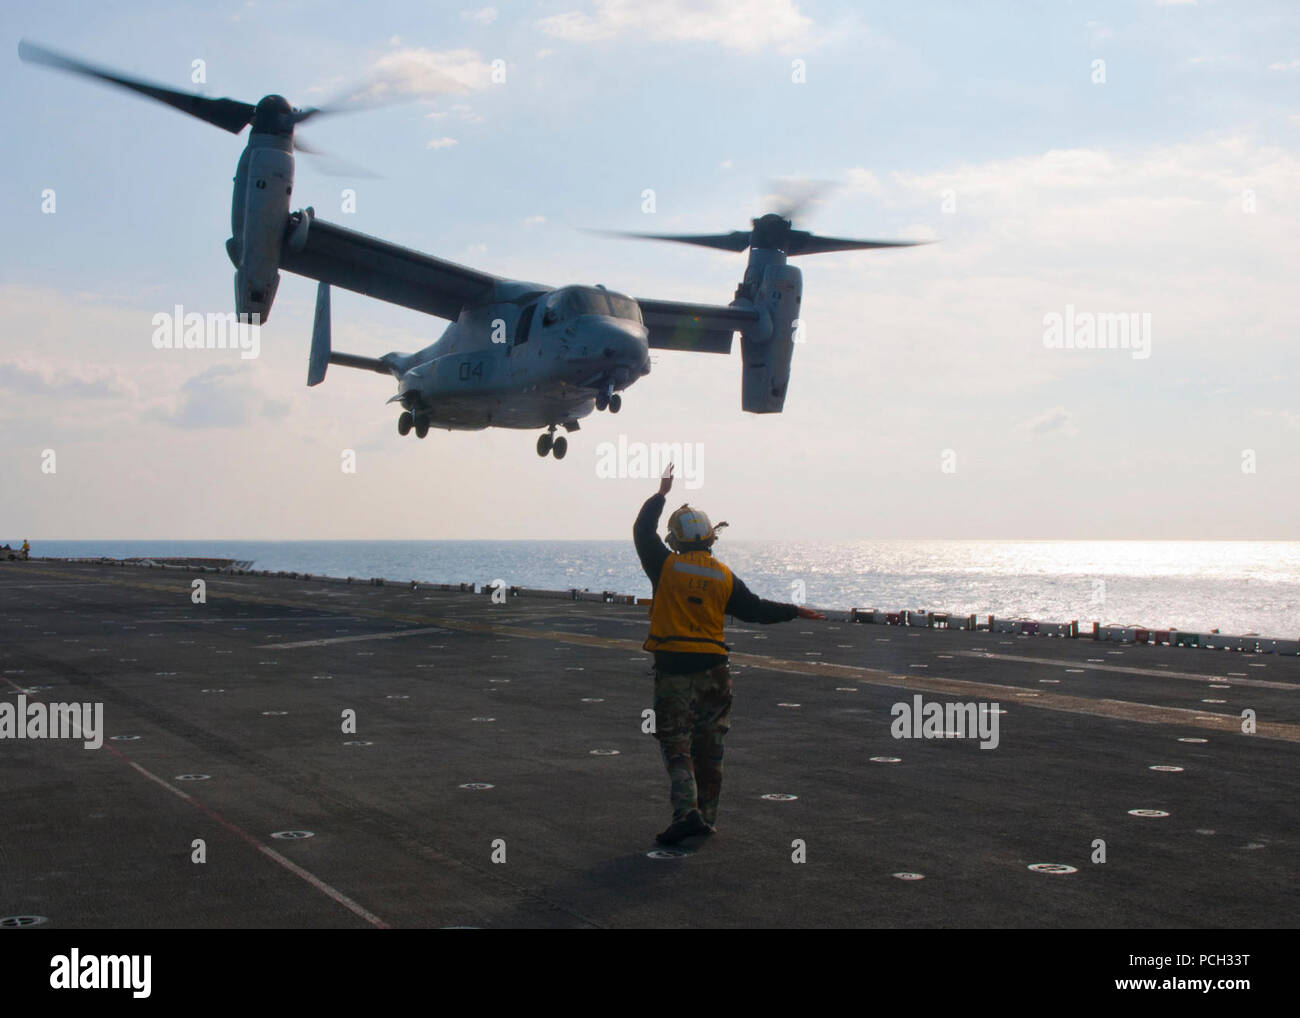 MEDITERRANEAN SEA (Nov. 24, 2012) Aviation Boatswain's Mate (Handling) 2nd Class Shannon R. Soderberg directs an MV-22 Osprey to takeoff during flight operations aboard the multipurpose amphibious assault ship USS Iwo Jima (LHD 7). Iwo Jima Amphibious Ready Group and embarked 24th Marine Expeditionary Unit (24th MEU) are deployed in support of maritime security operations and theater security cooperation efforts in the U.S. 6th Fleet area of responsibility. Stock Photo